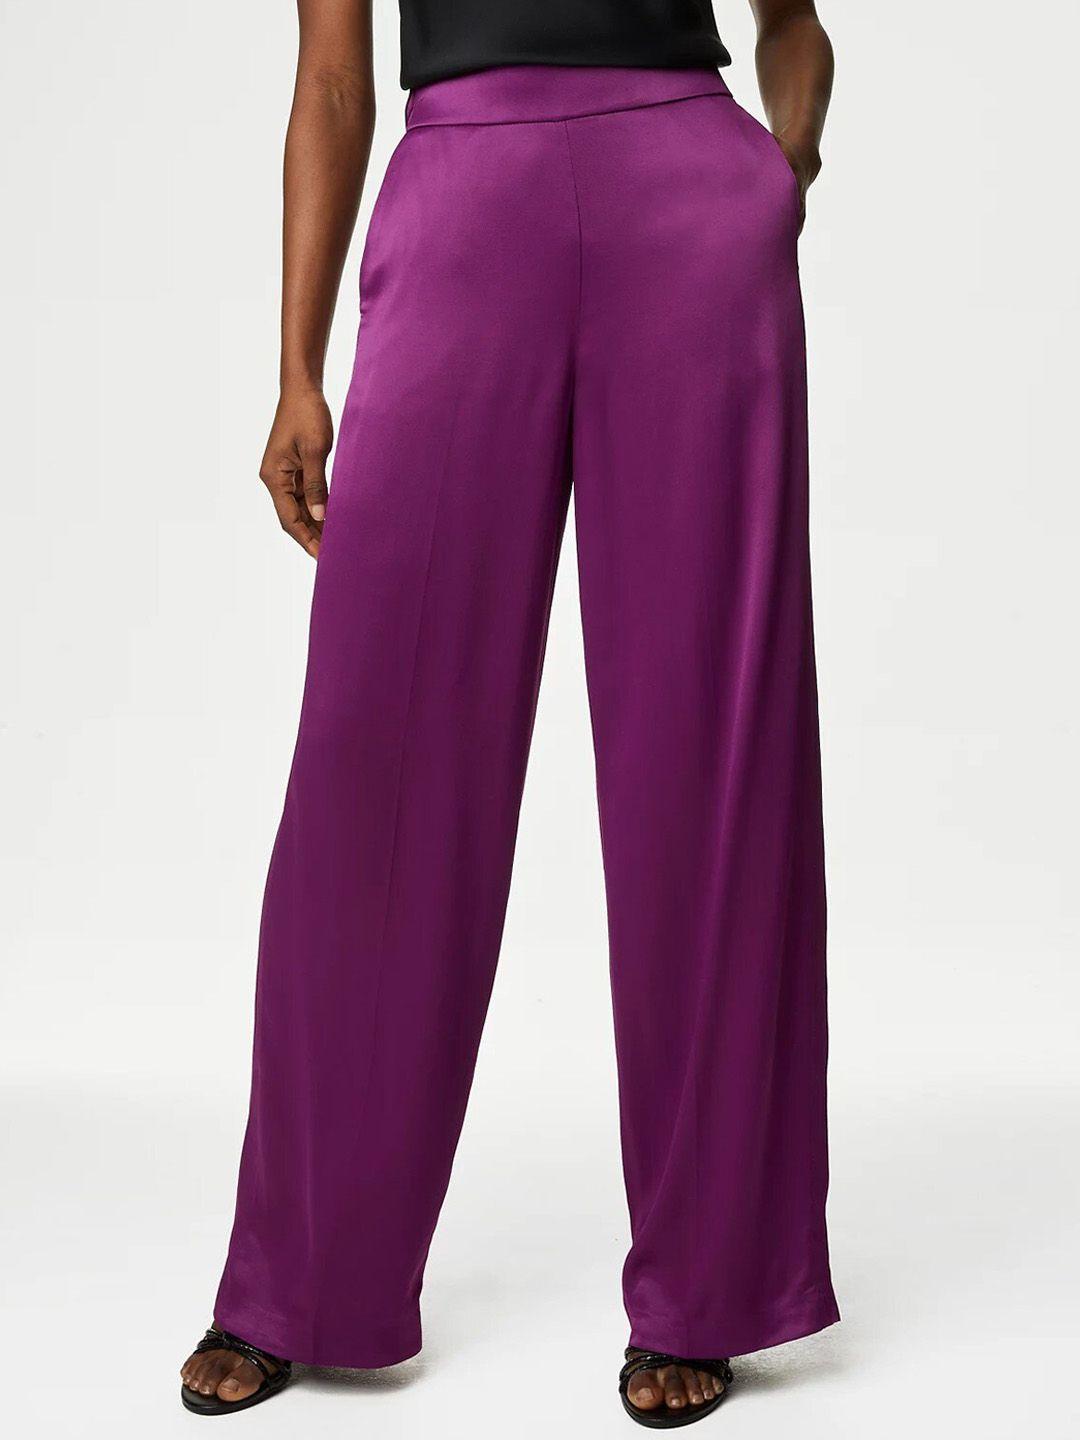 marks & spencer women high-rise satin parallel trousers